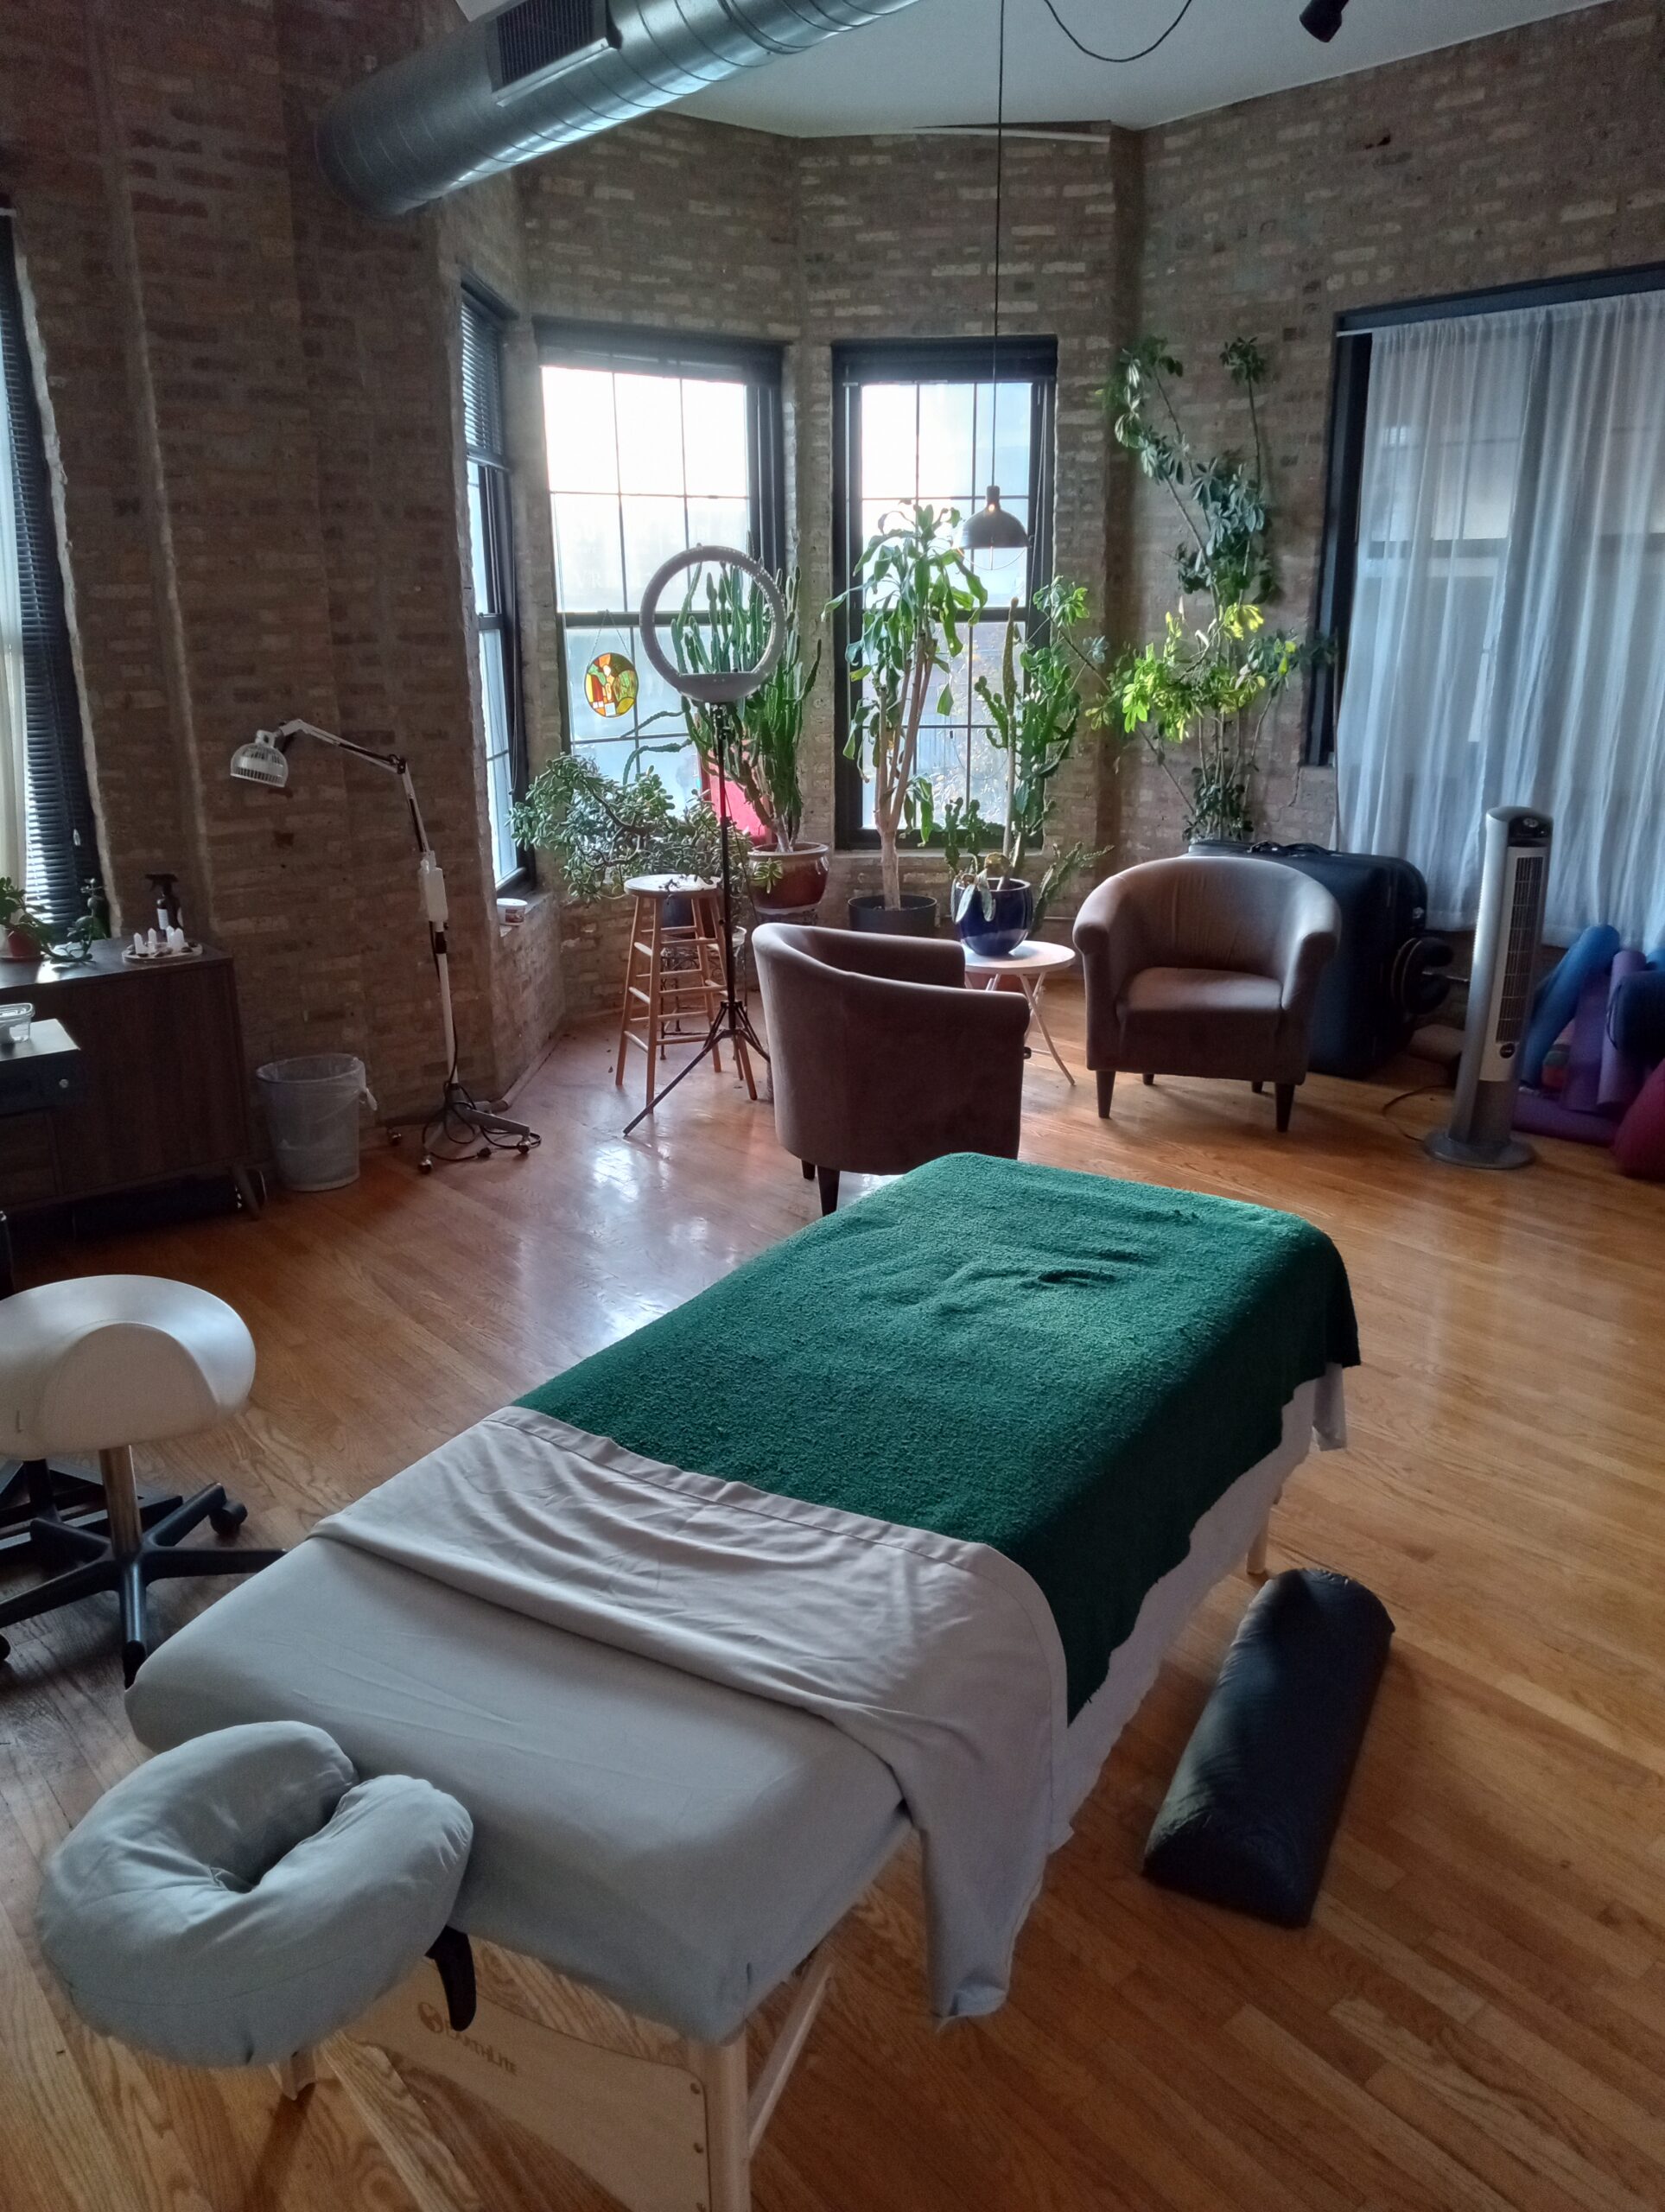 Body Euphoria Massage Therapy's Studio in Logan Square with Plants and Good Sunlight for a Chill Nice Massage